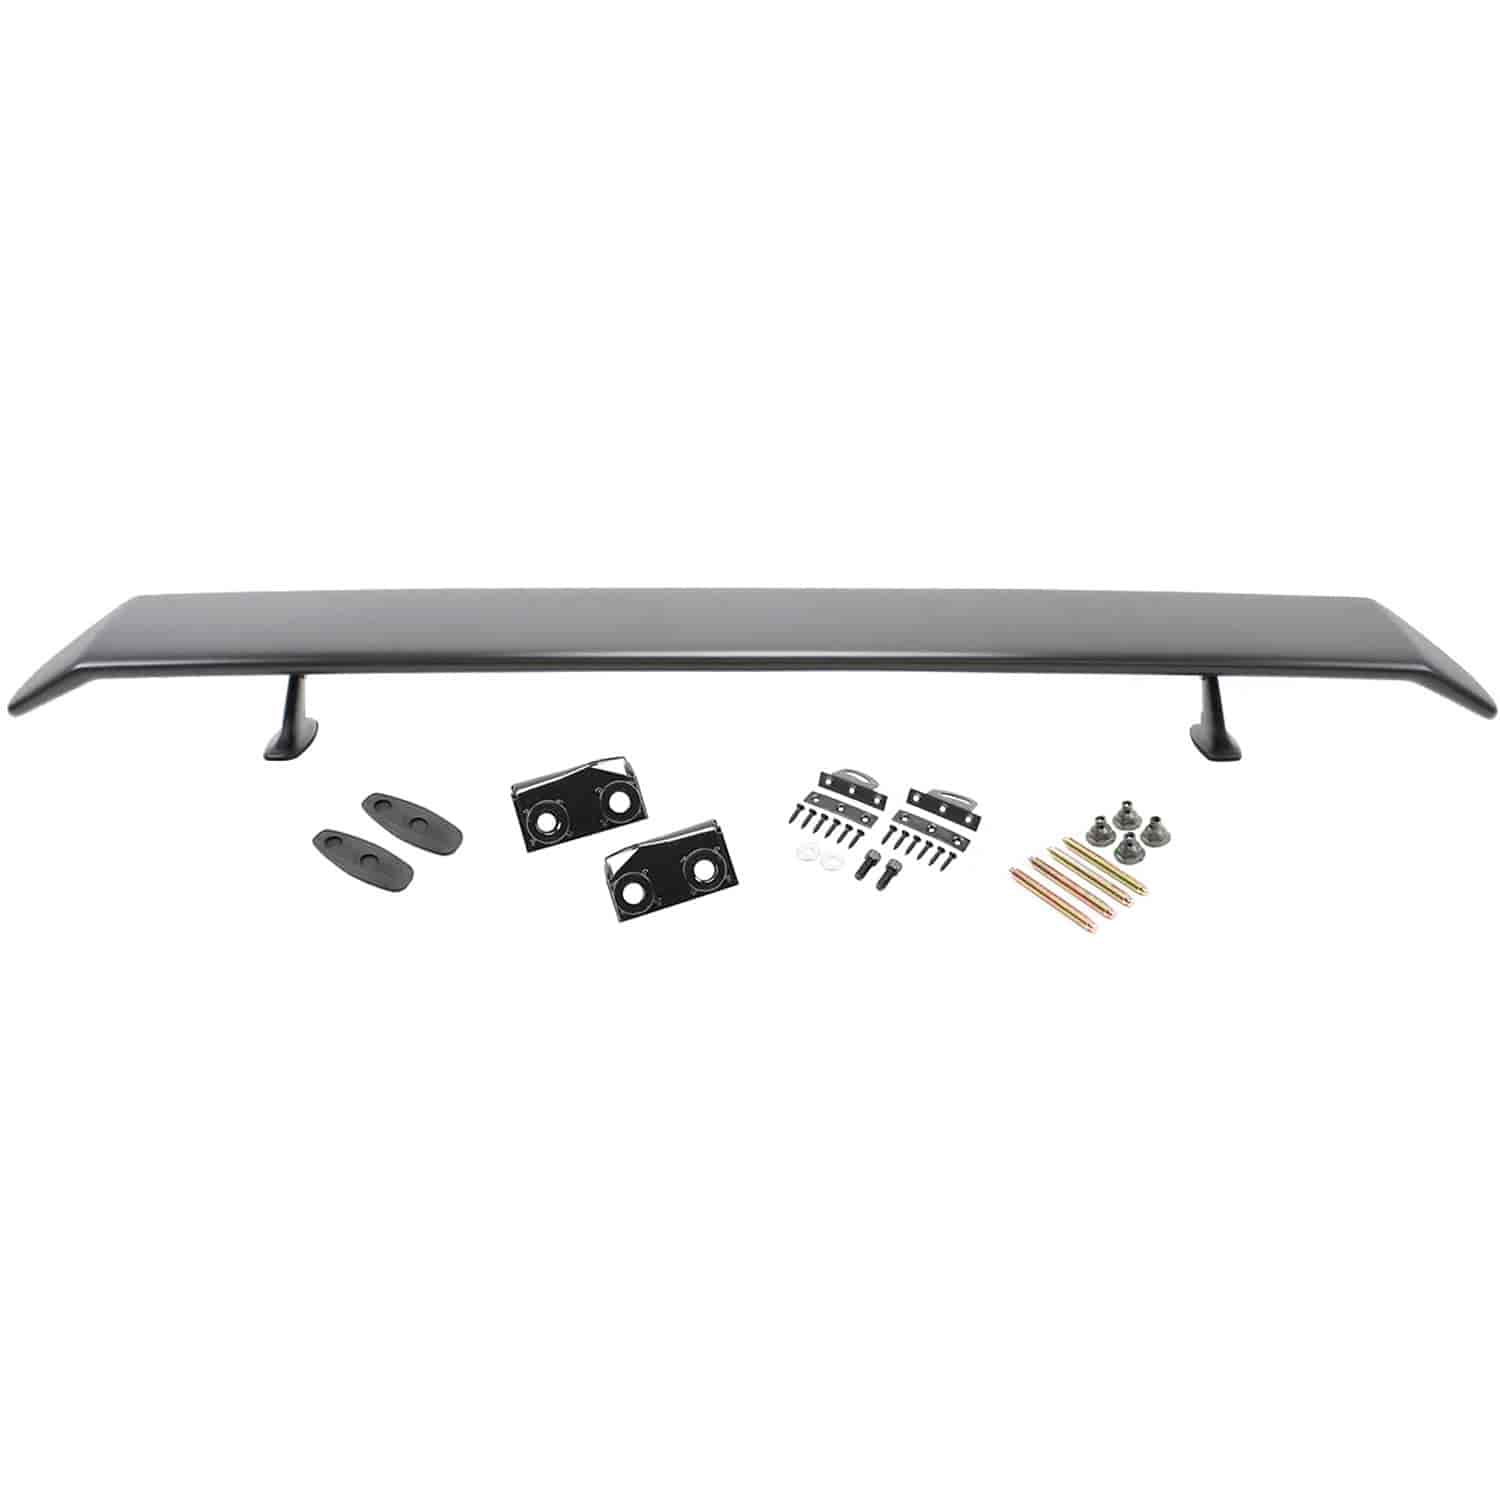 70 Mustang Rear Wing Value+Plus Spoiler Complete Kit